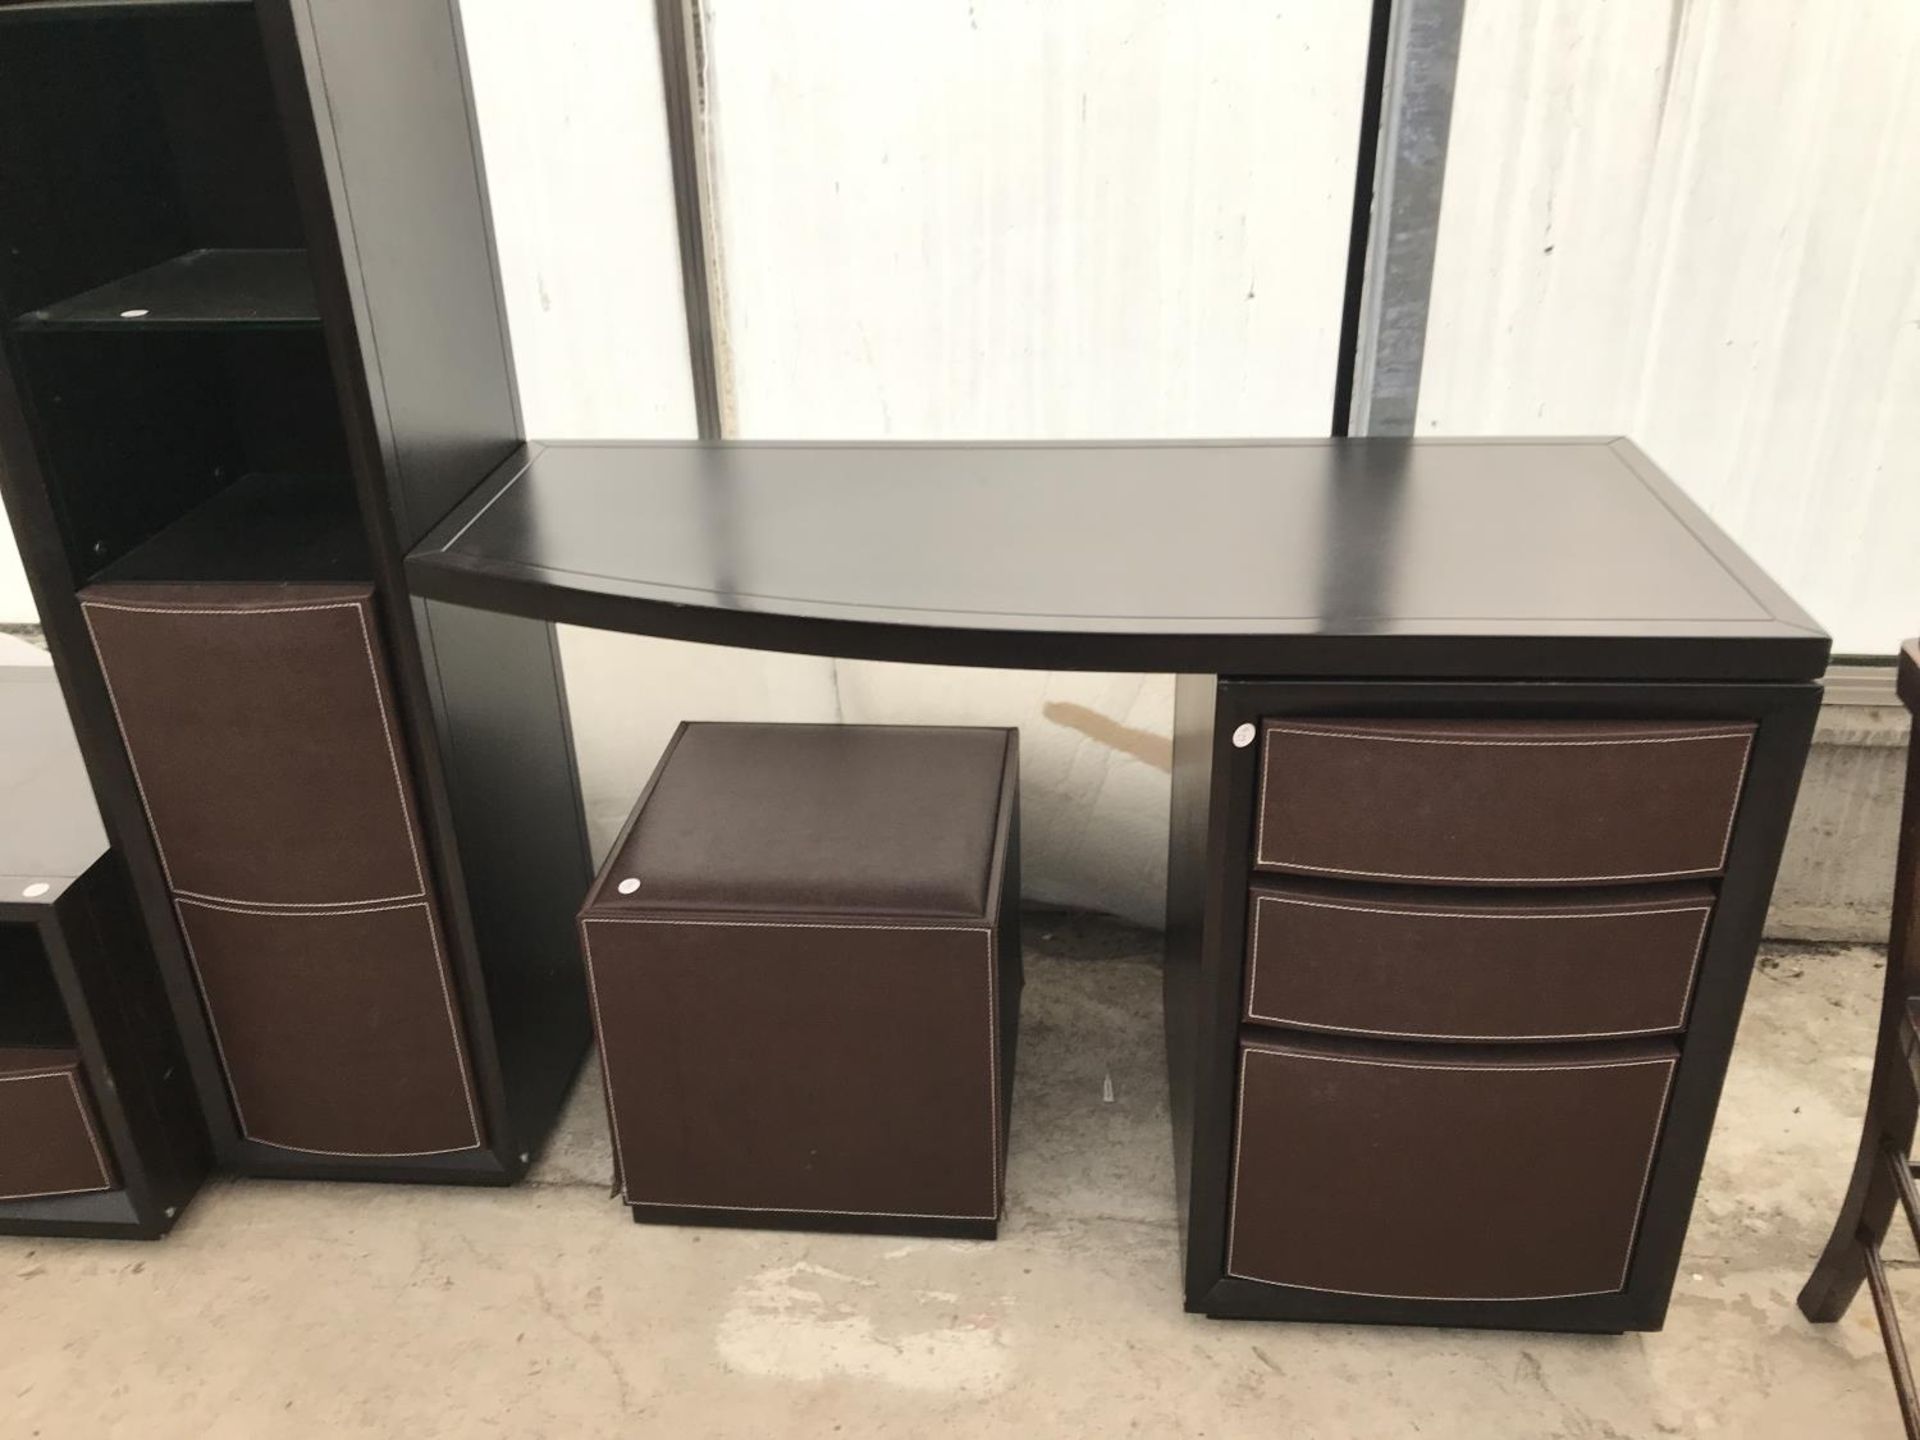 FIVE ITEMS OF MODERN BLACK FURNITURE - TWO CABINETS WITH SINGLE LEATHERETTE DRAWERS, A TALL - Image 4 of 4